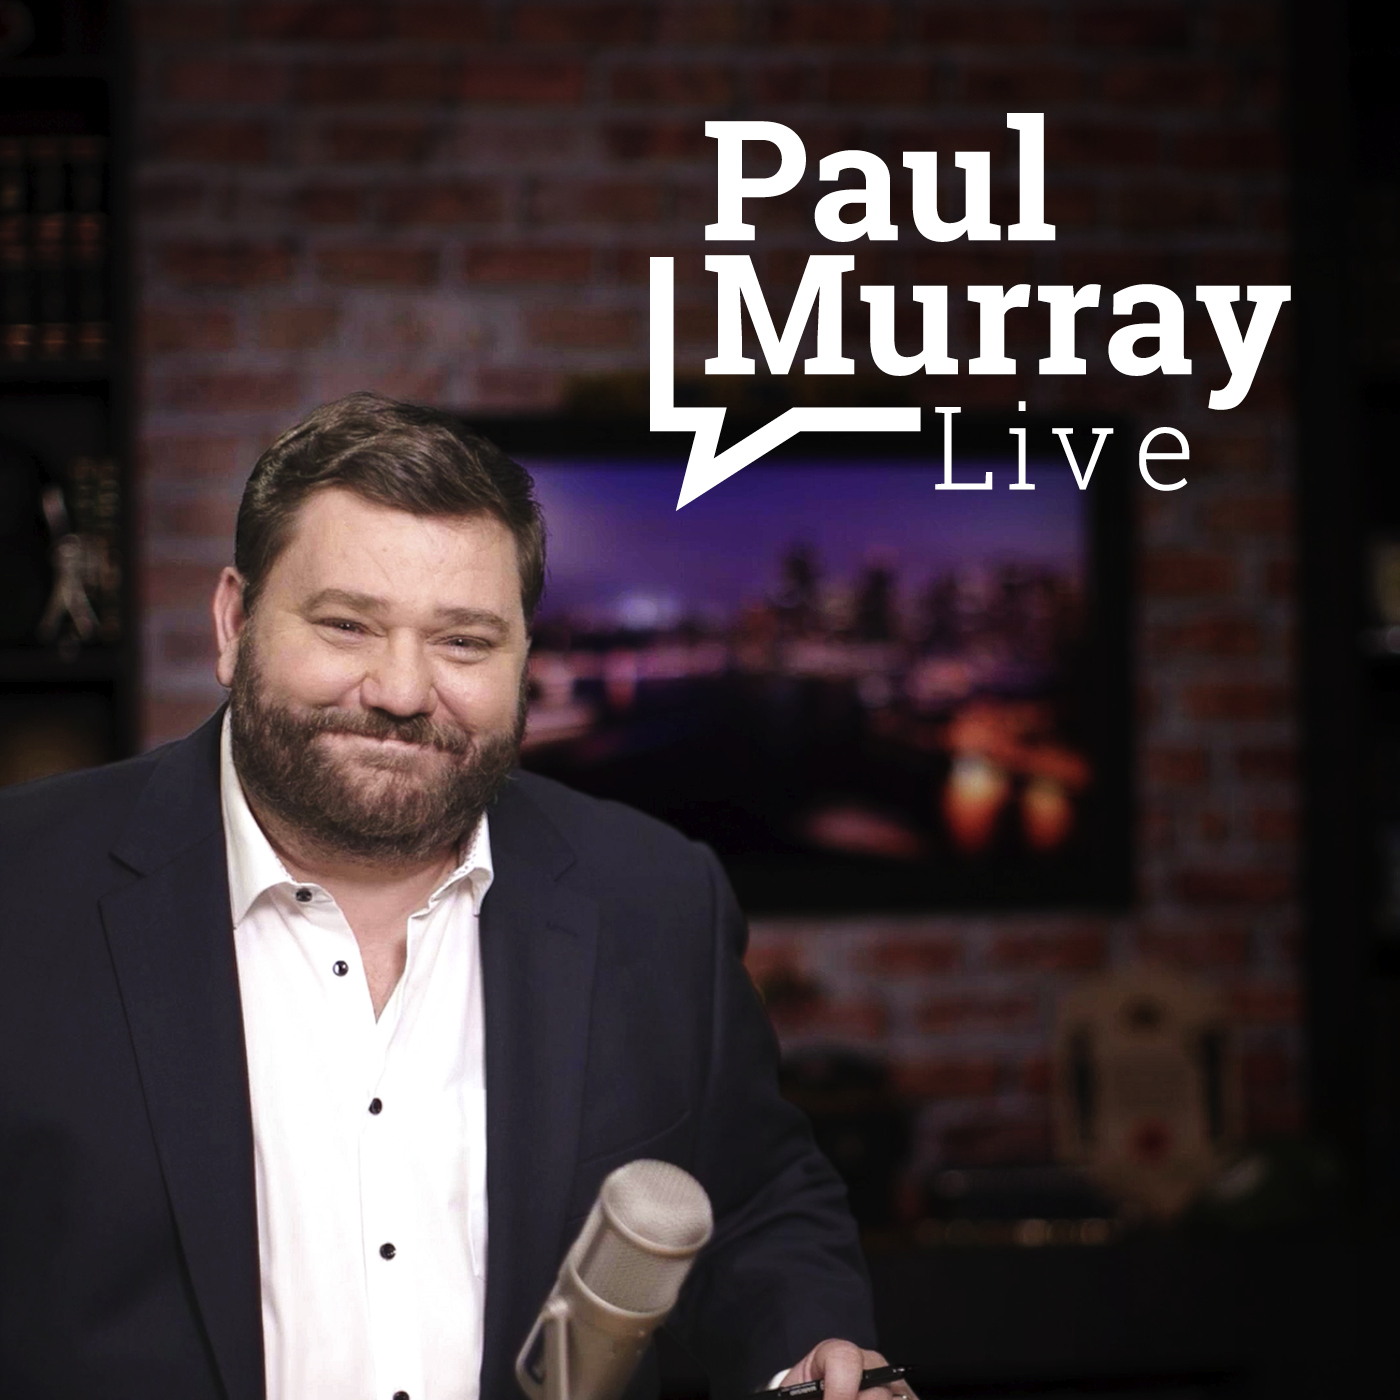 Paul Murray Live, Wednesday 5th August